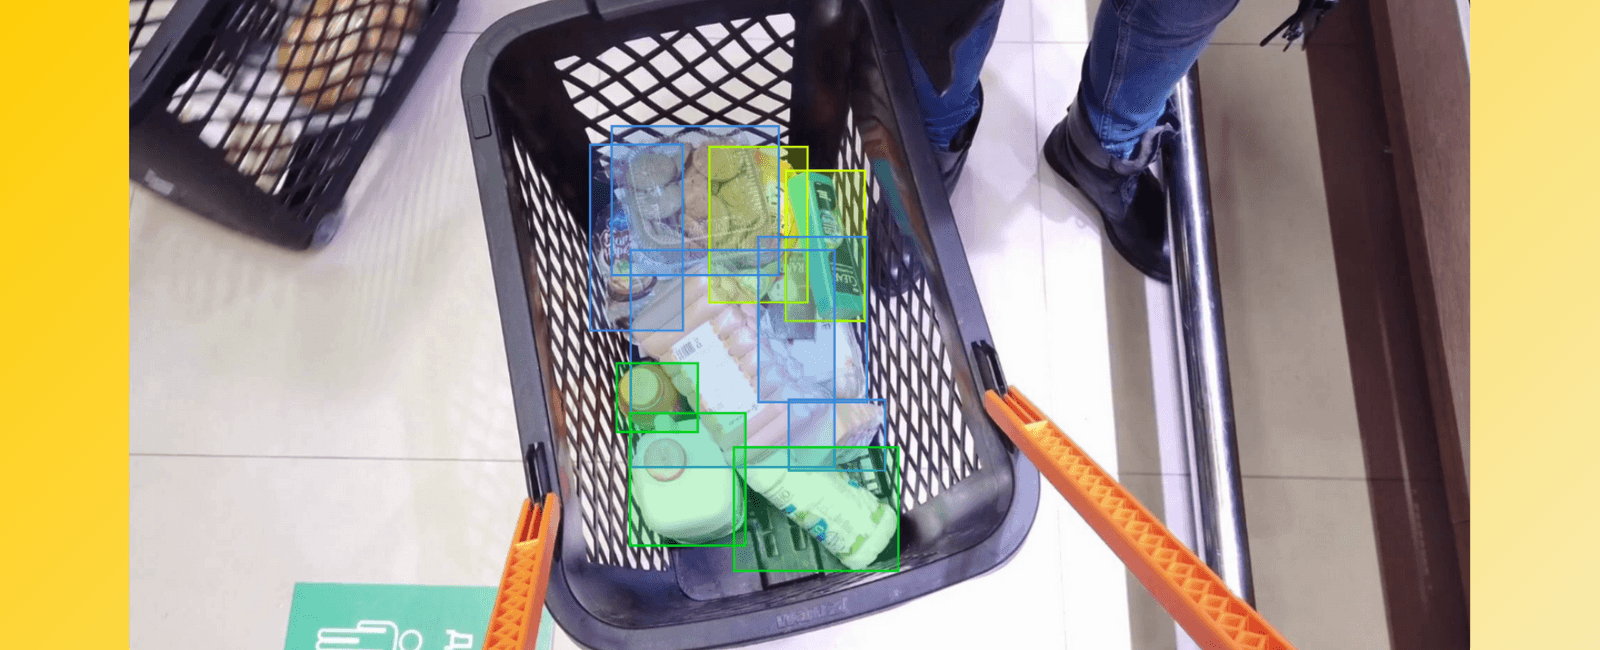 Grocery Store Solutions with Precise Annotation